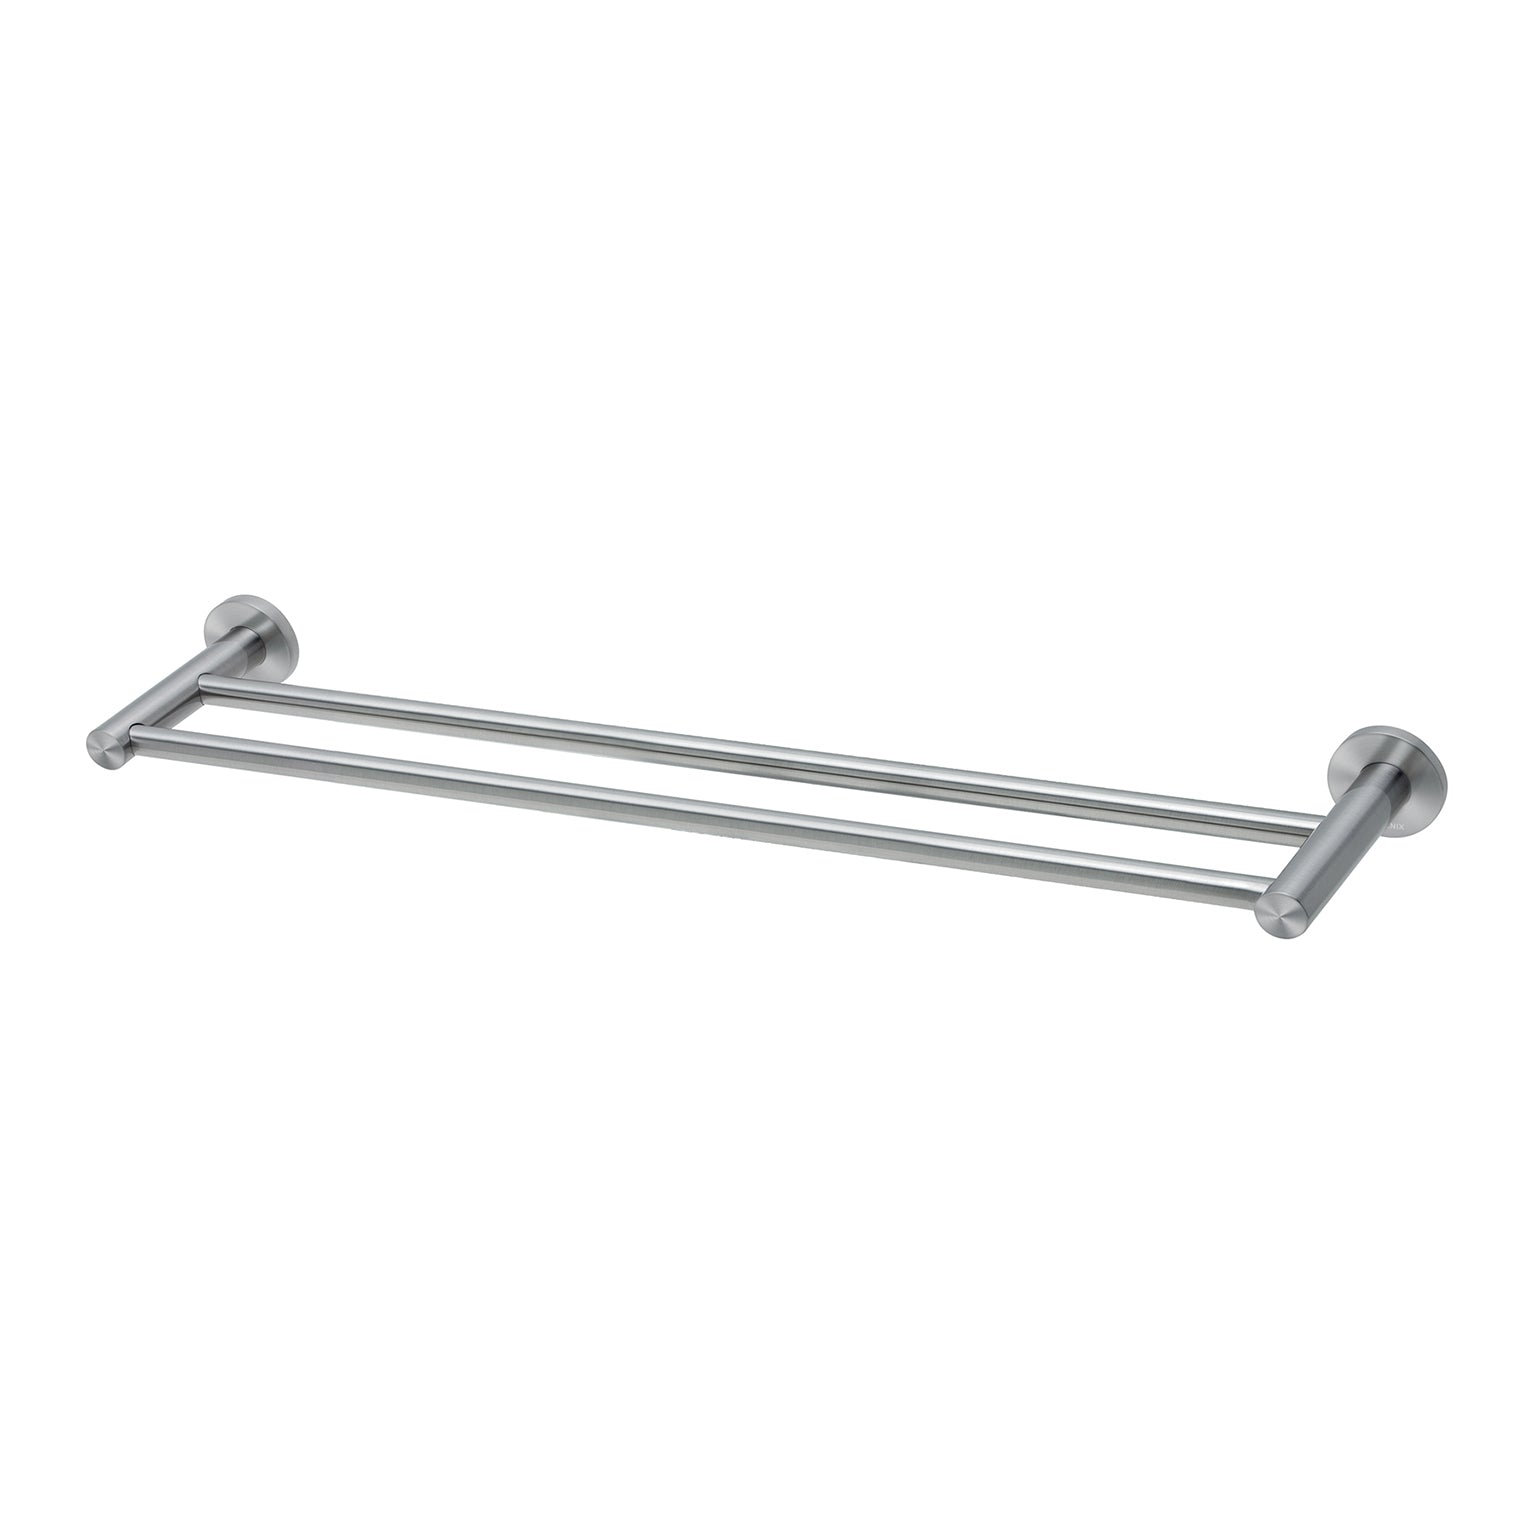 PHOENIX RADII SS 316 DOUBLE NON-HEATED TOWEL RAIL ROUND PLATE STAINLESS STEEL 600MM